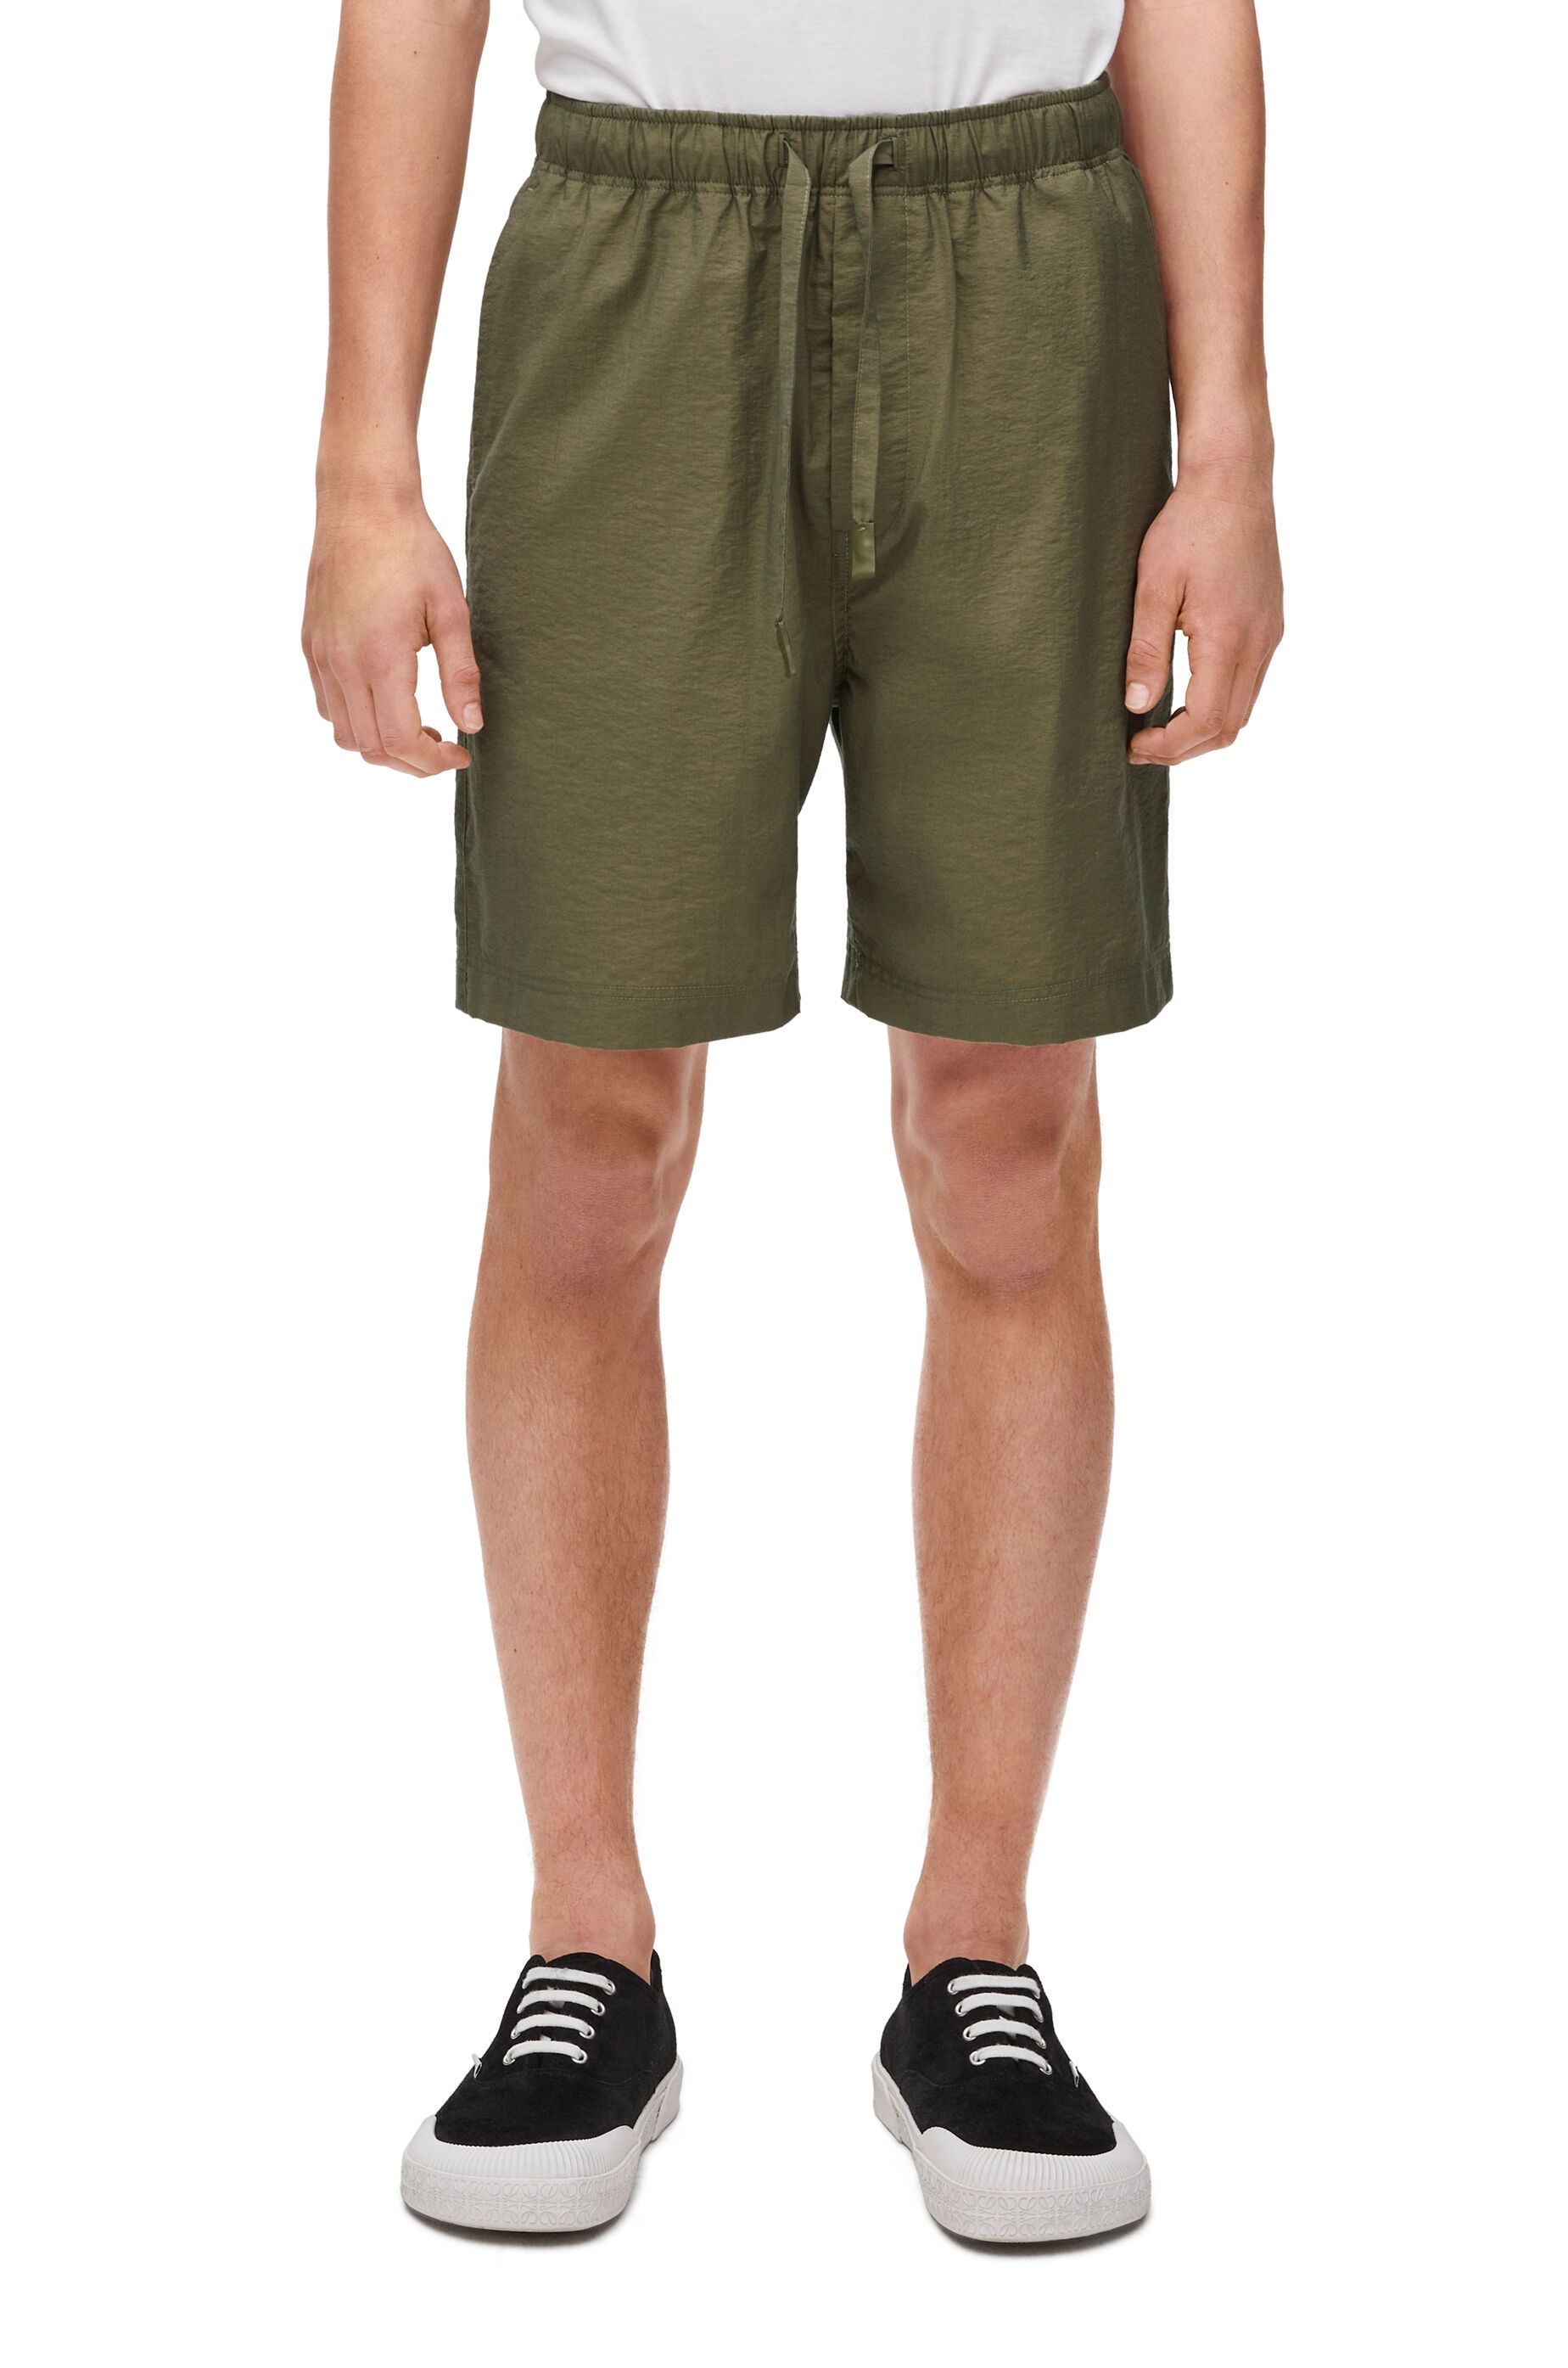 Shorts in cotton blend - 3